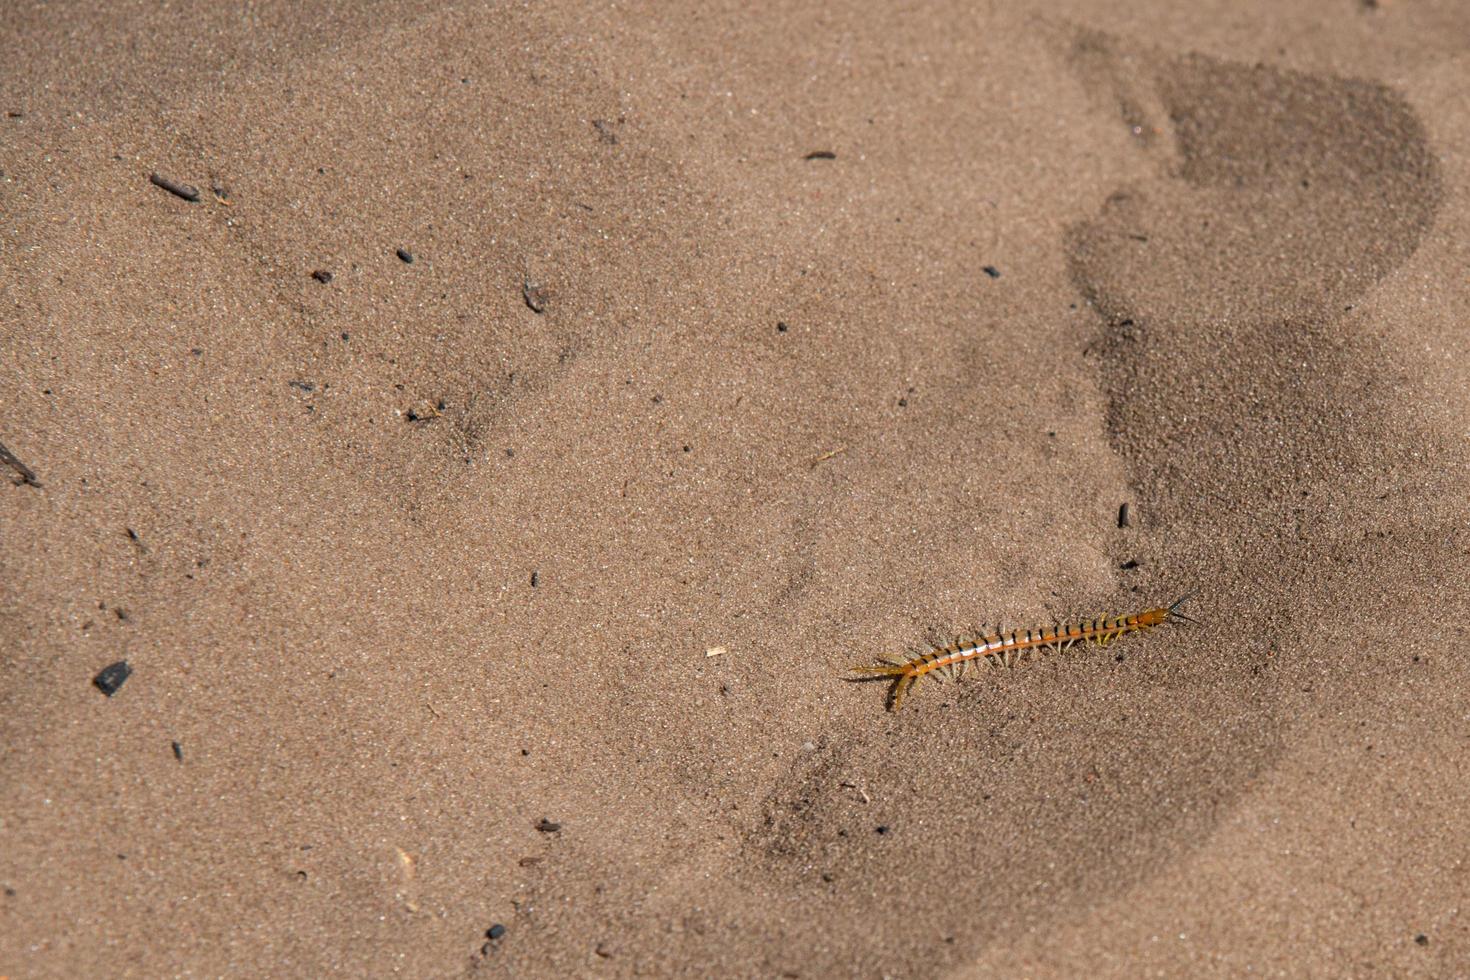 Scolopendra in an african desert. Sand around. Namibia photo